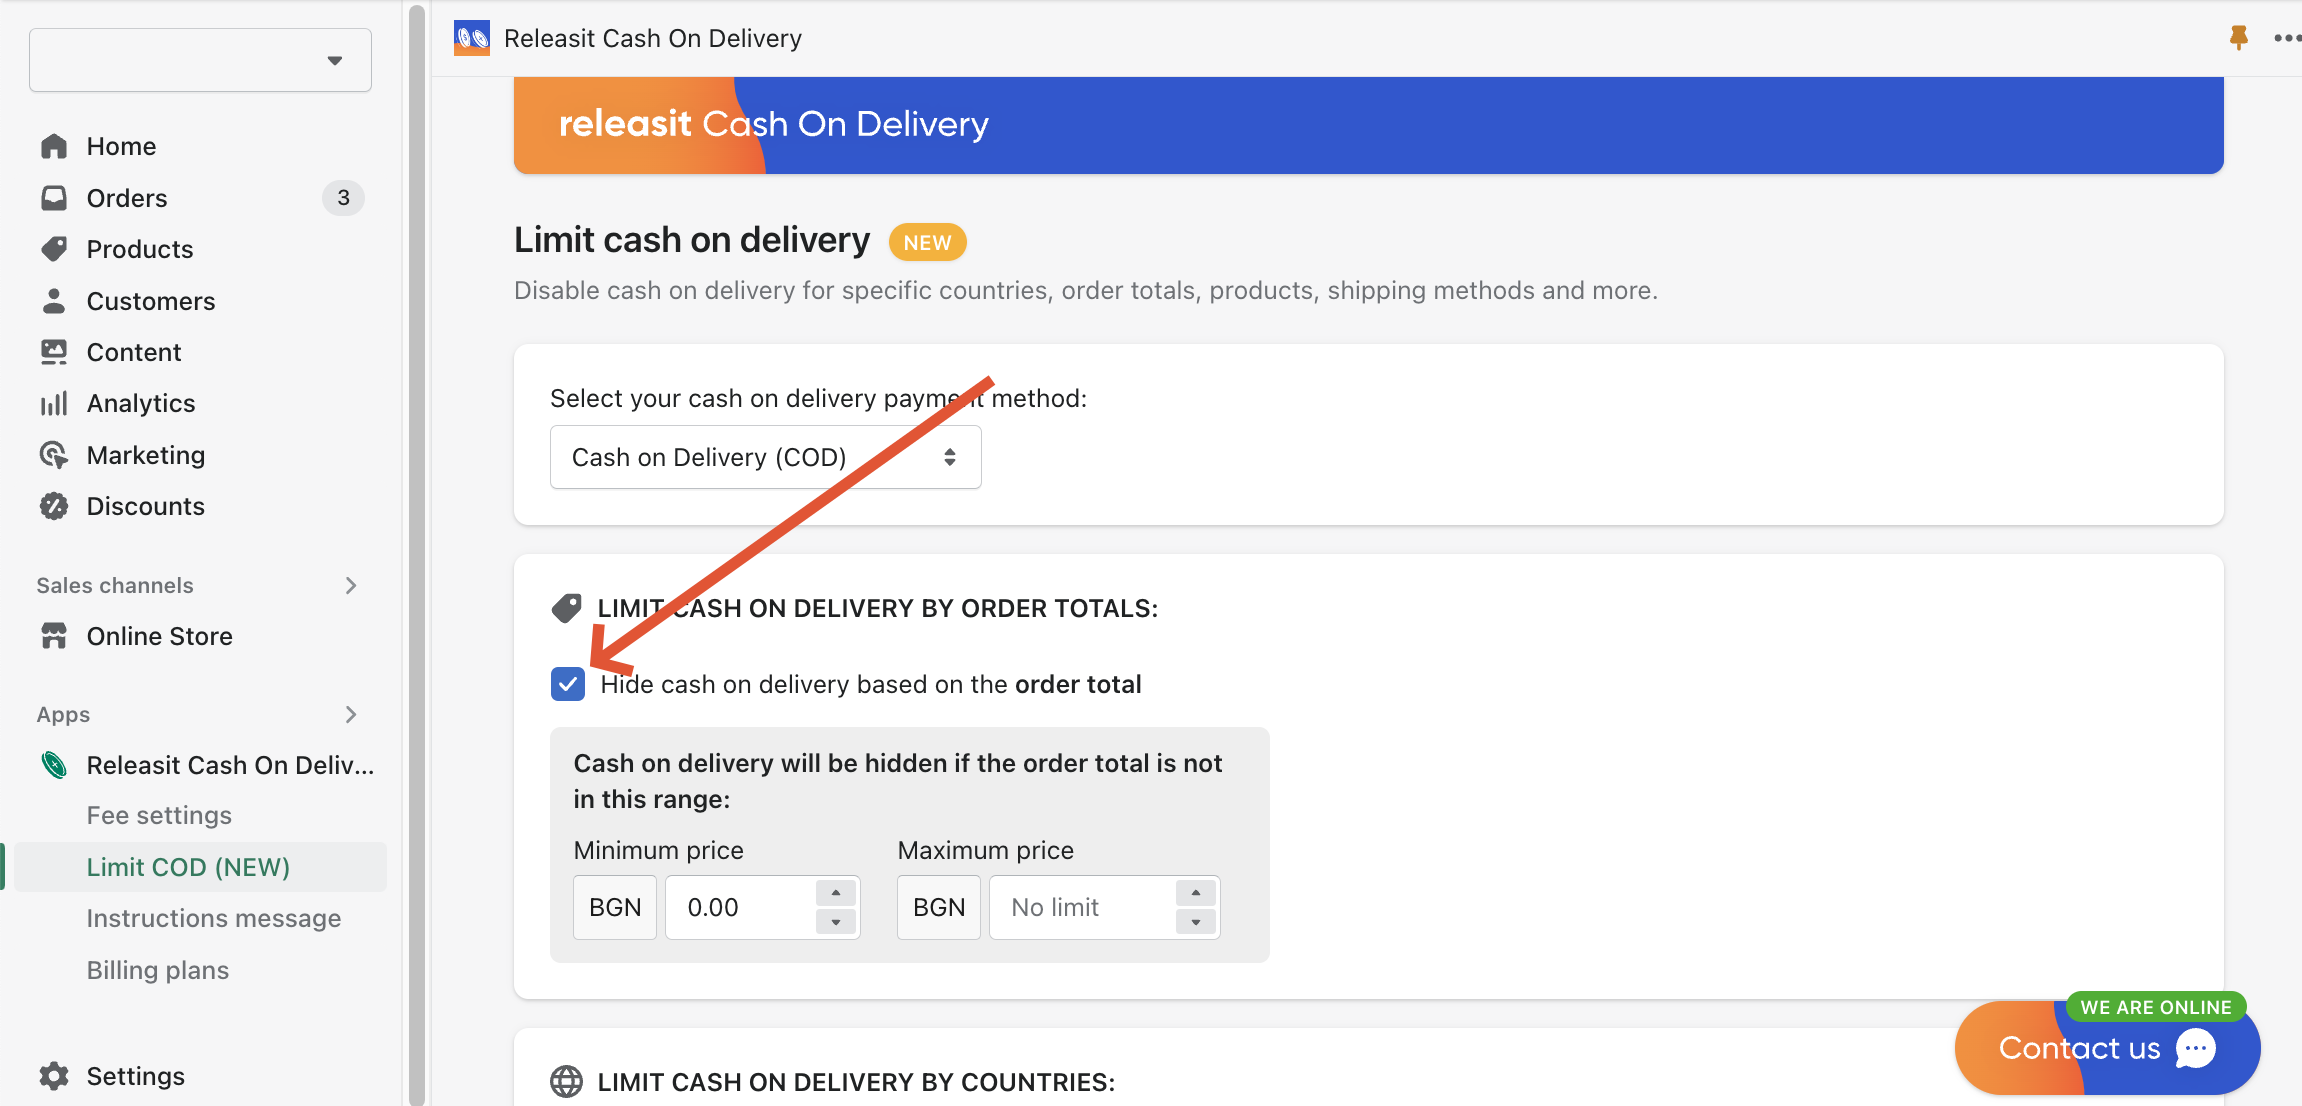 Releasit Cash On Delivery Limit COD page hide based on order total